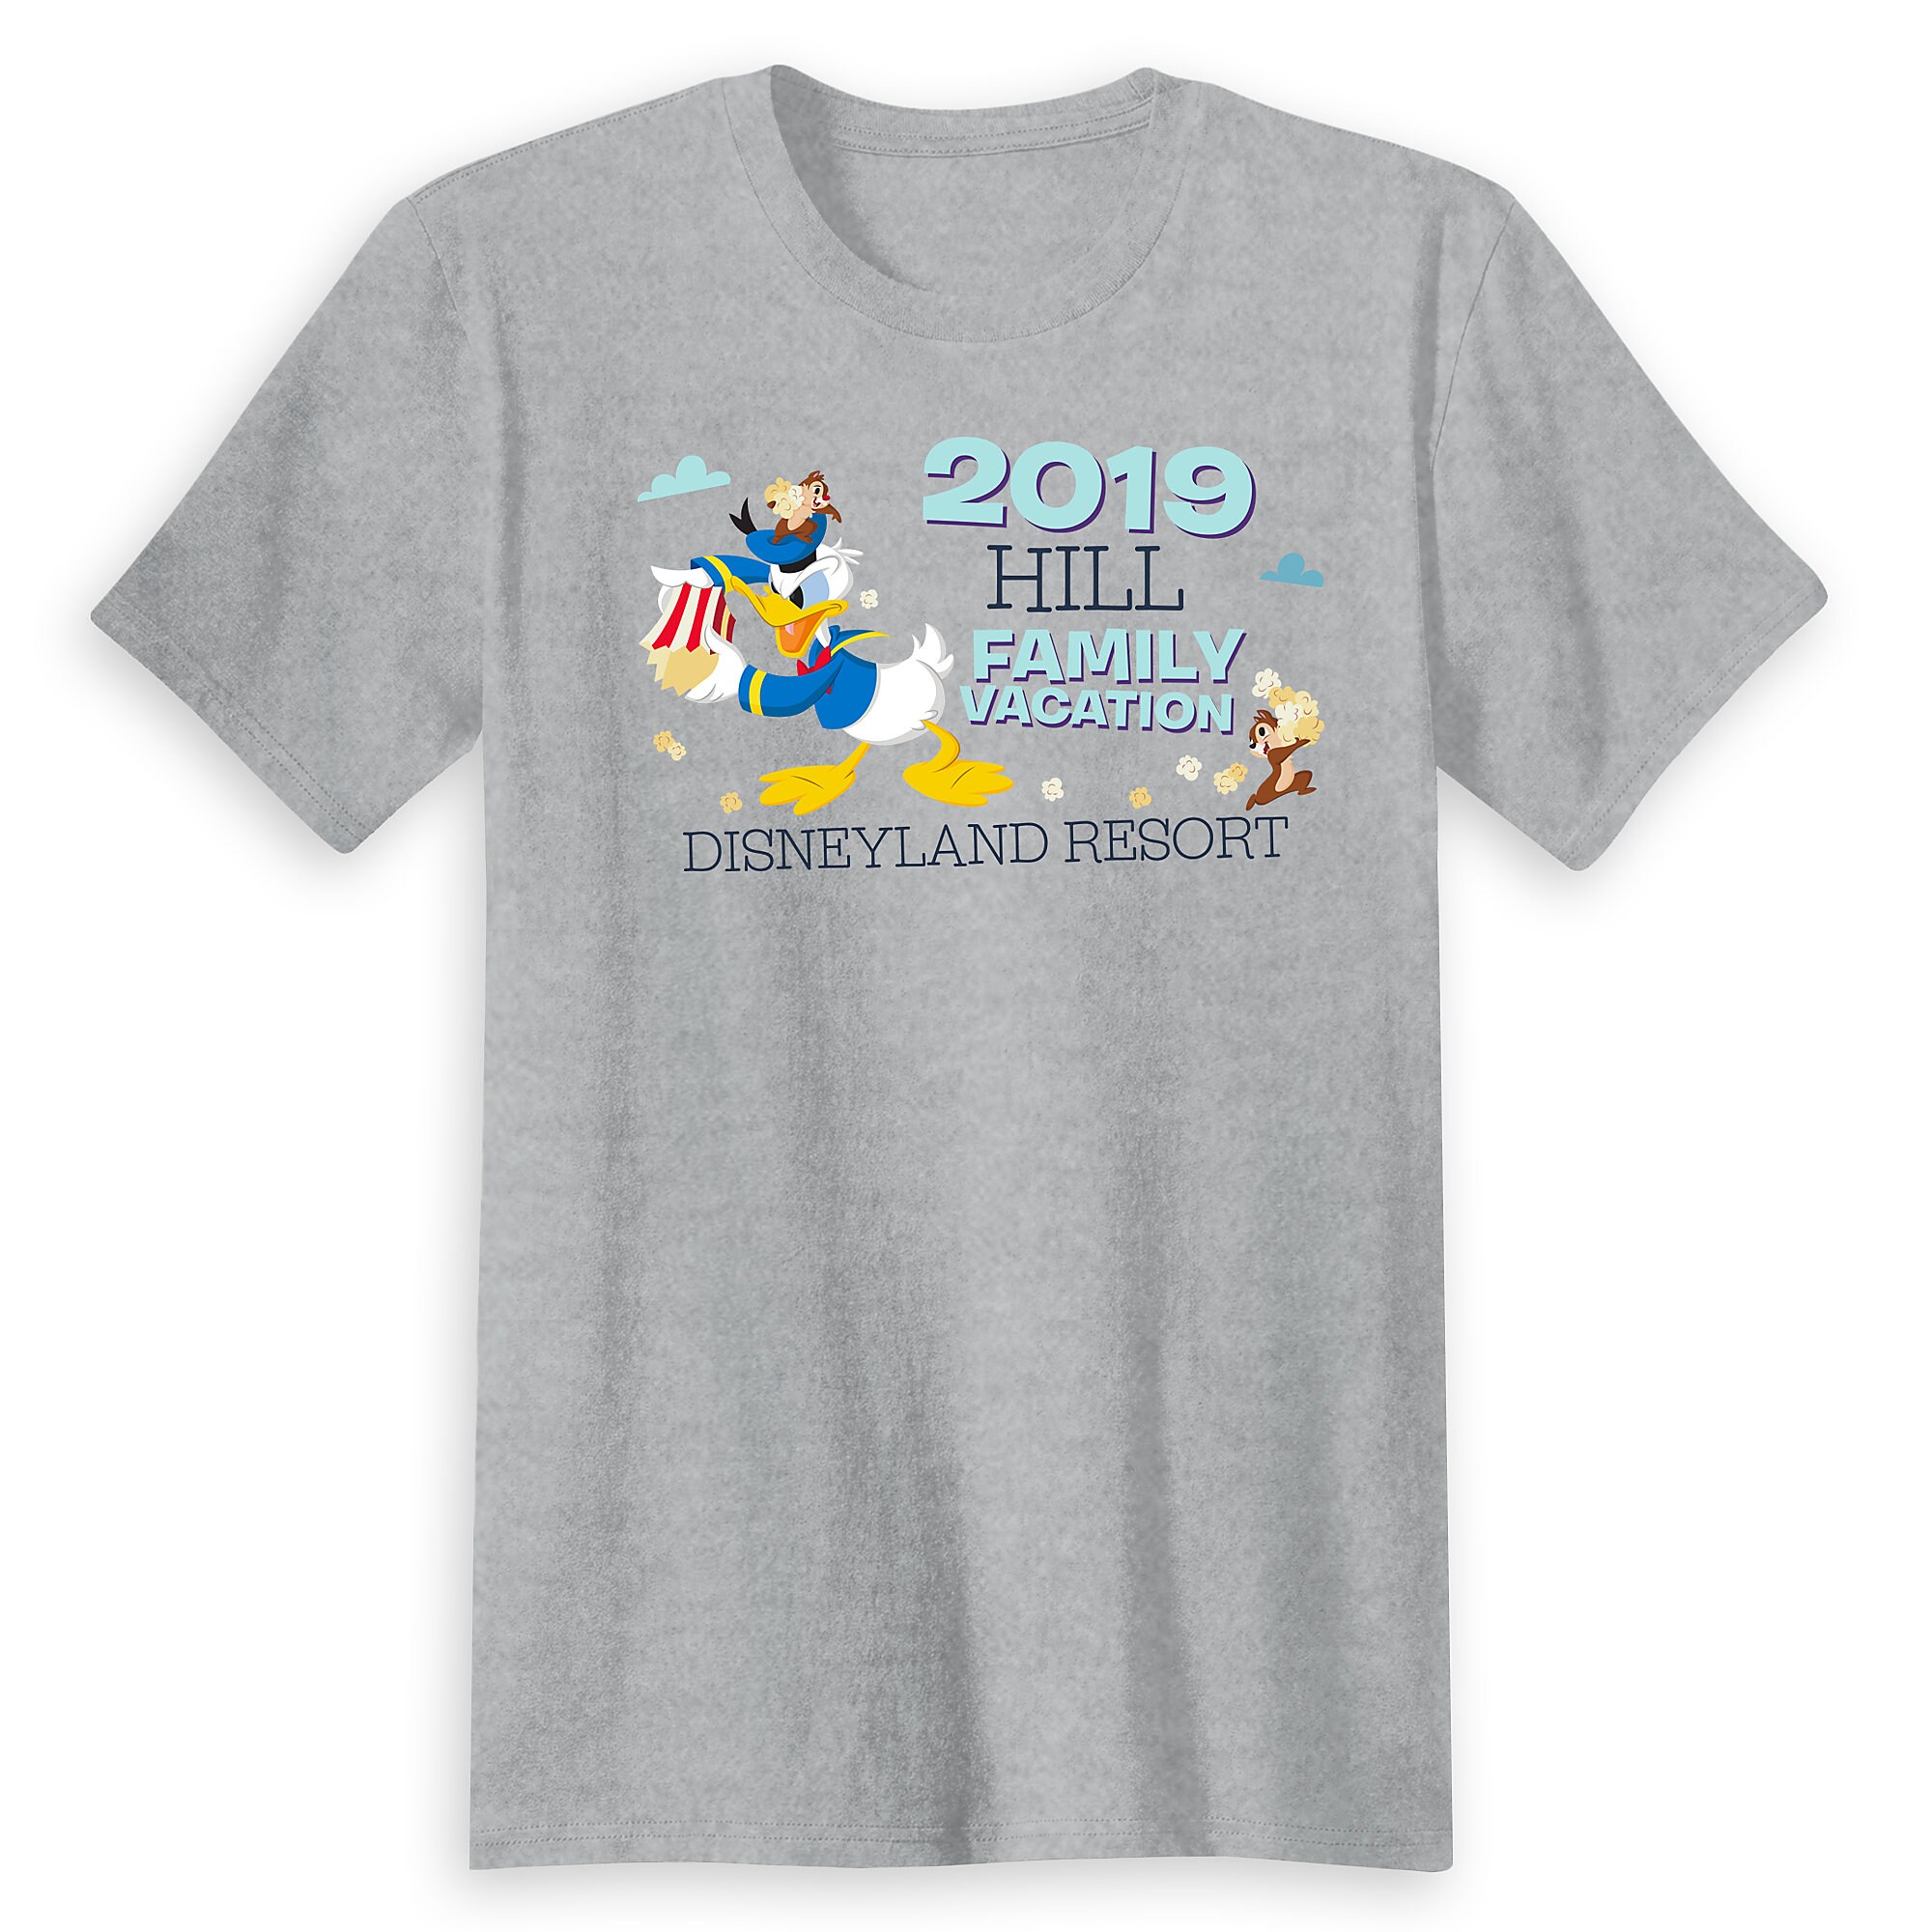 Adults' Donald Duck and Chip 'n Dale Family Vacation T-Shirt - Disneyland Resort - Customized